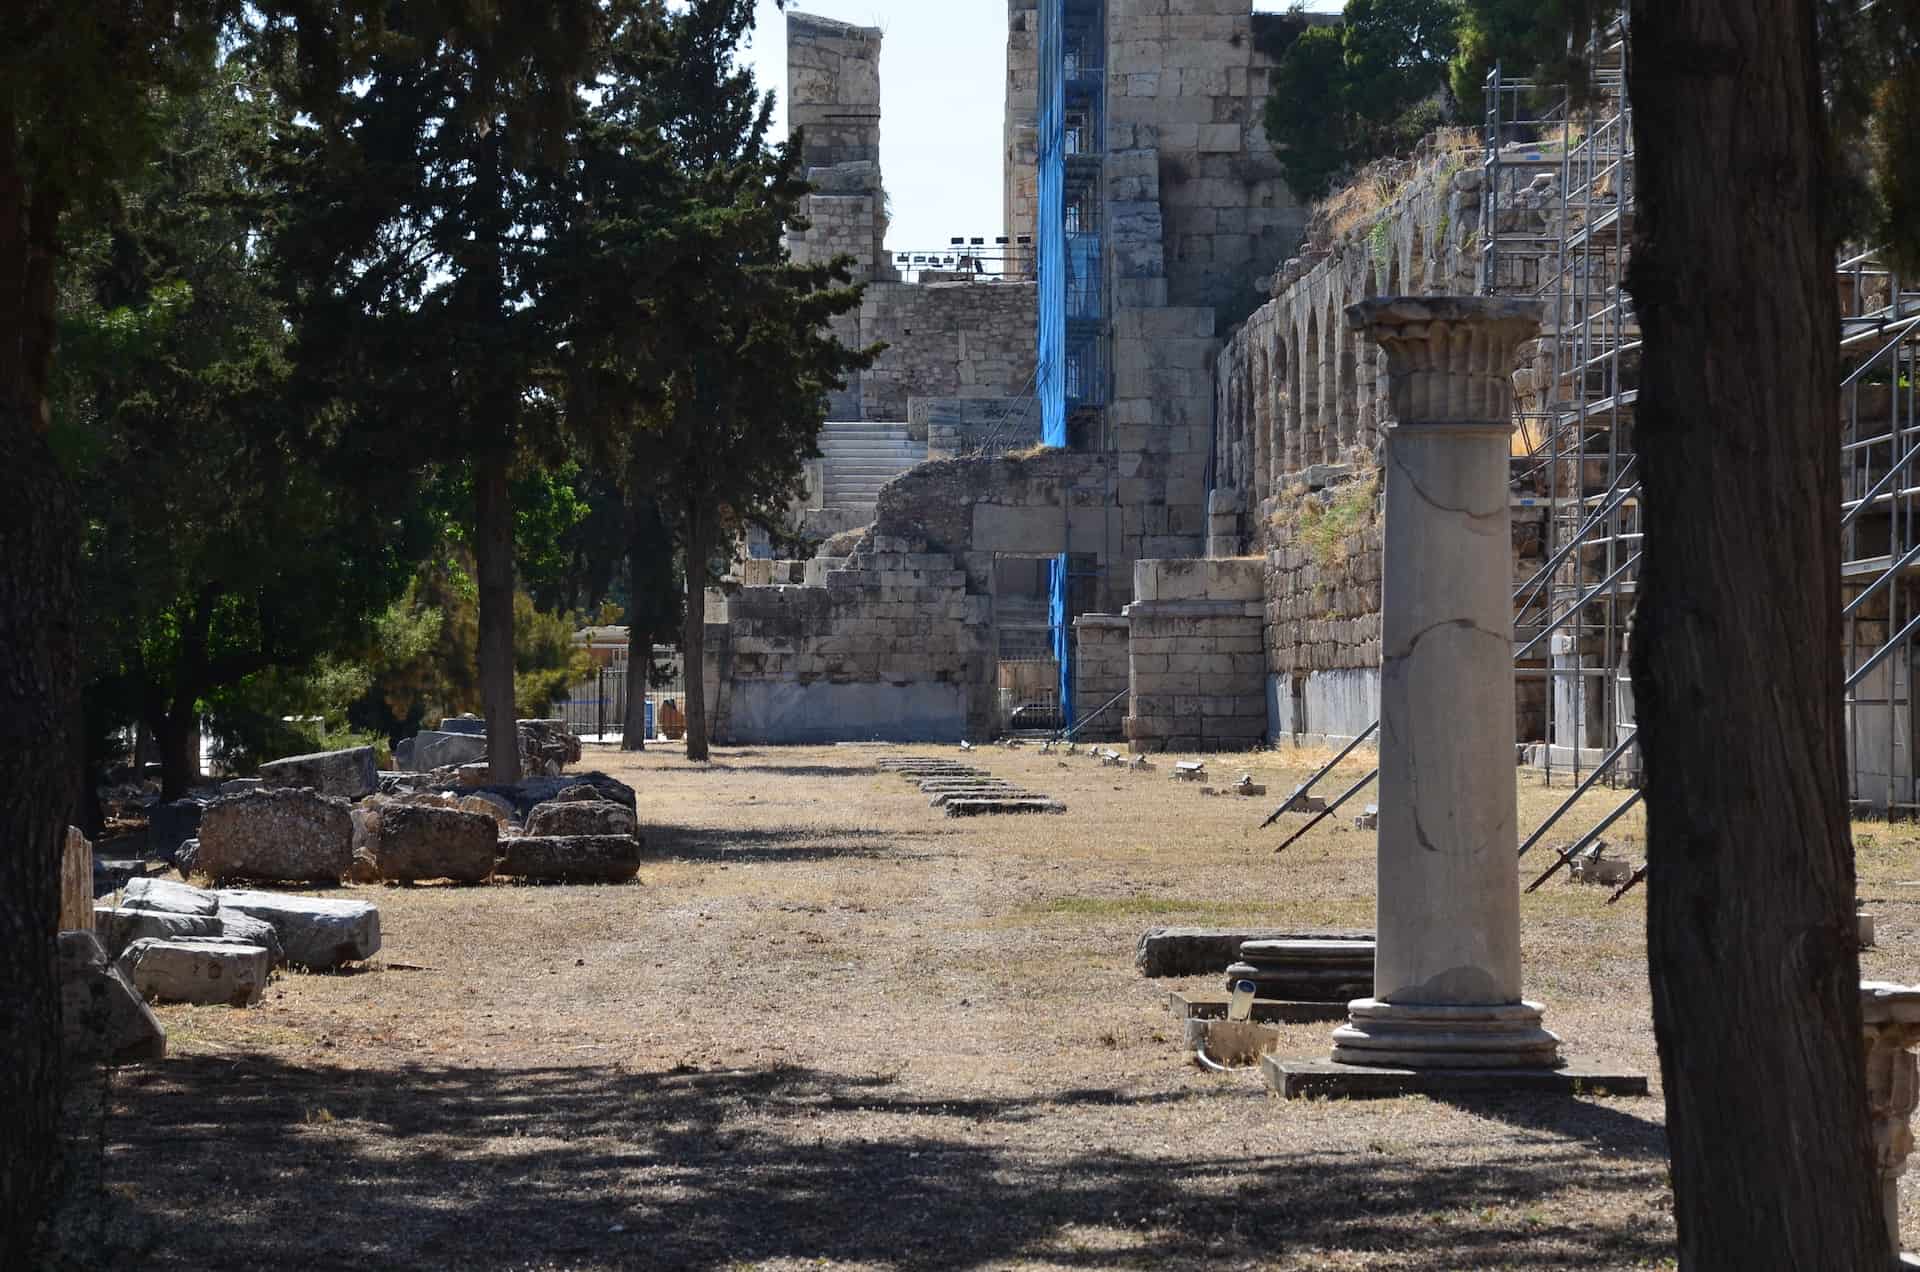 Looking towards the Odeon of Herodes Atticus from the Stoa of Eugene's